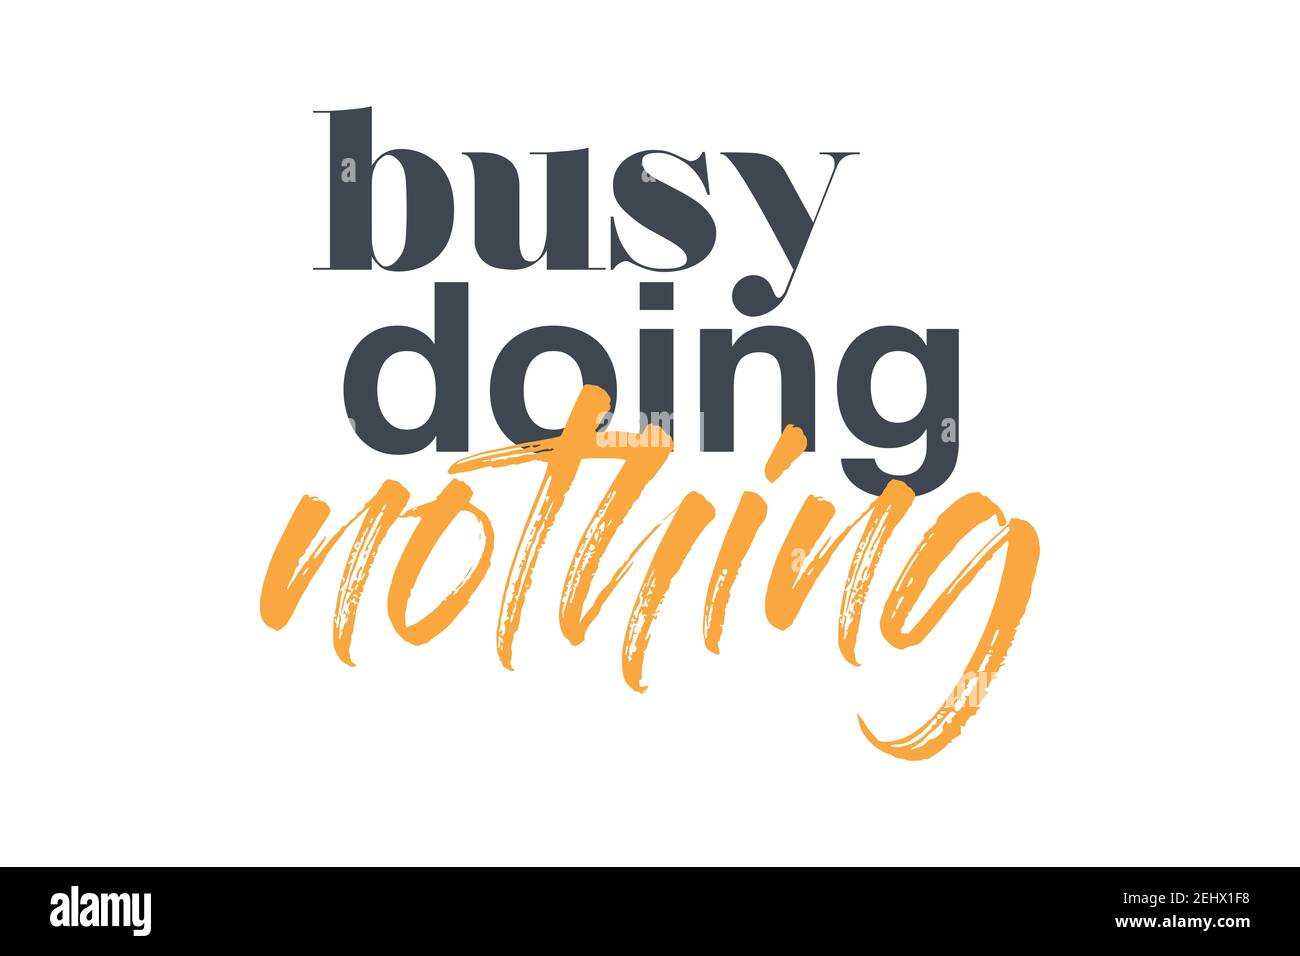 Modern, creative, experimental graphic design of a funny saying ' busy doing nothing'. Urban, bold, vibrant and playful typography in yellow and grey Stock Photo